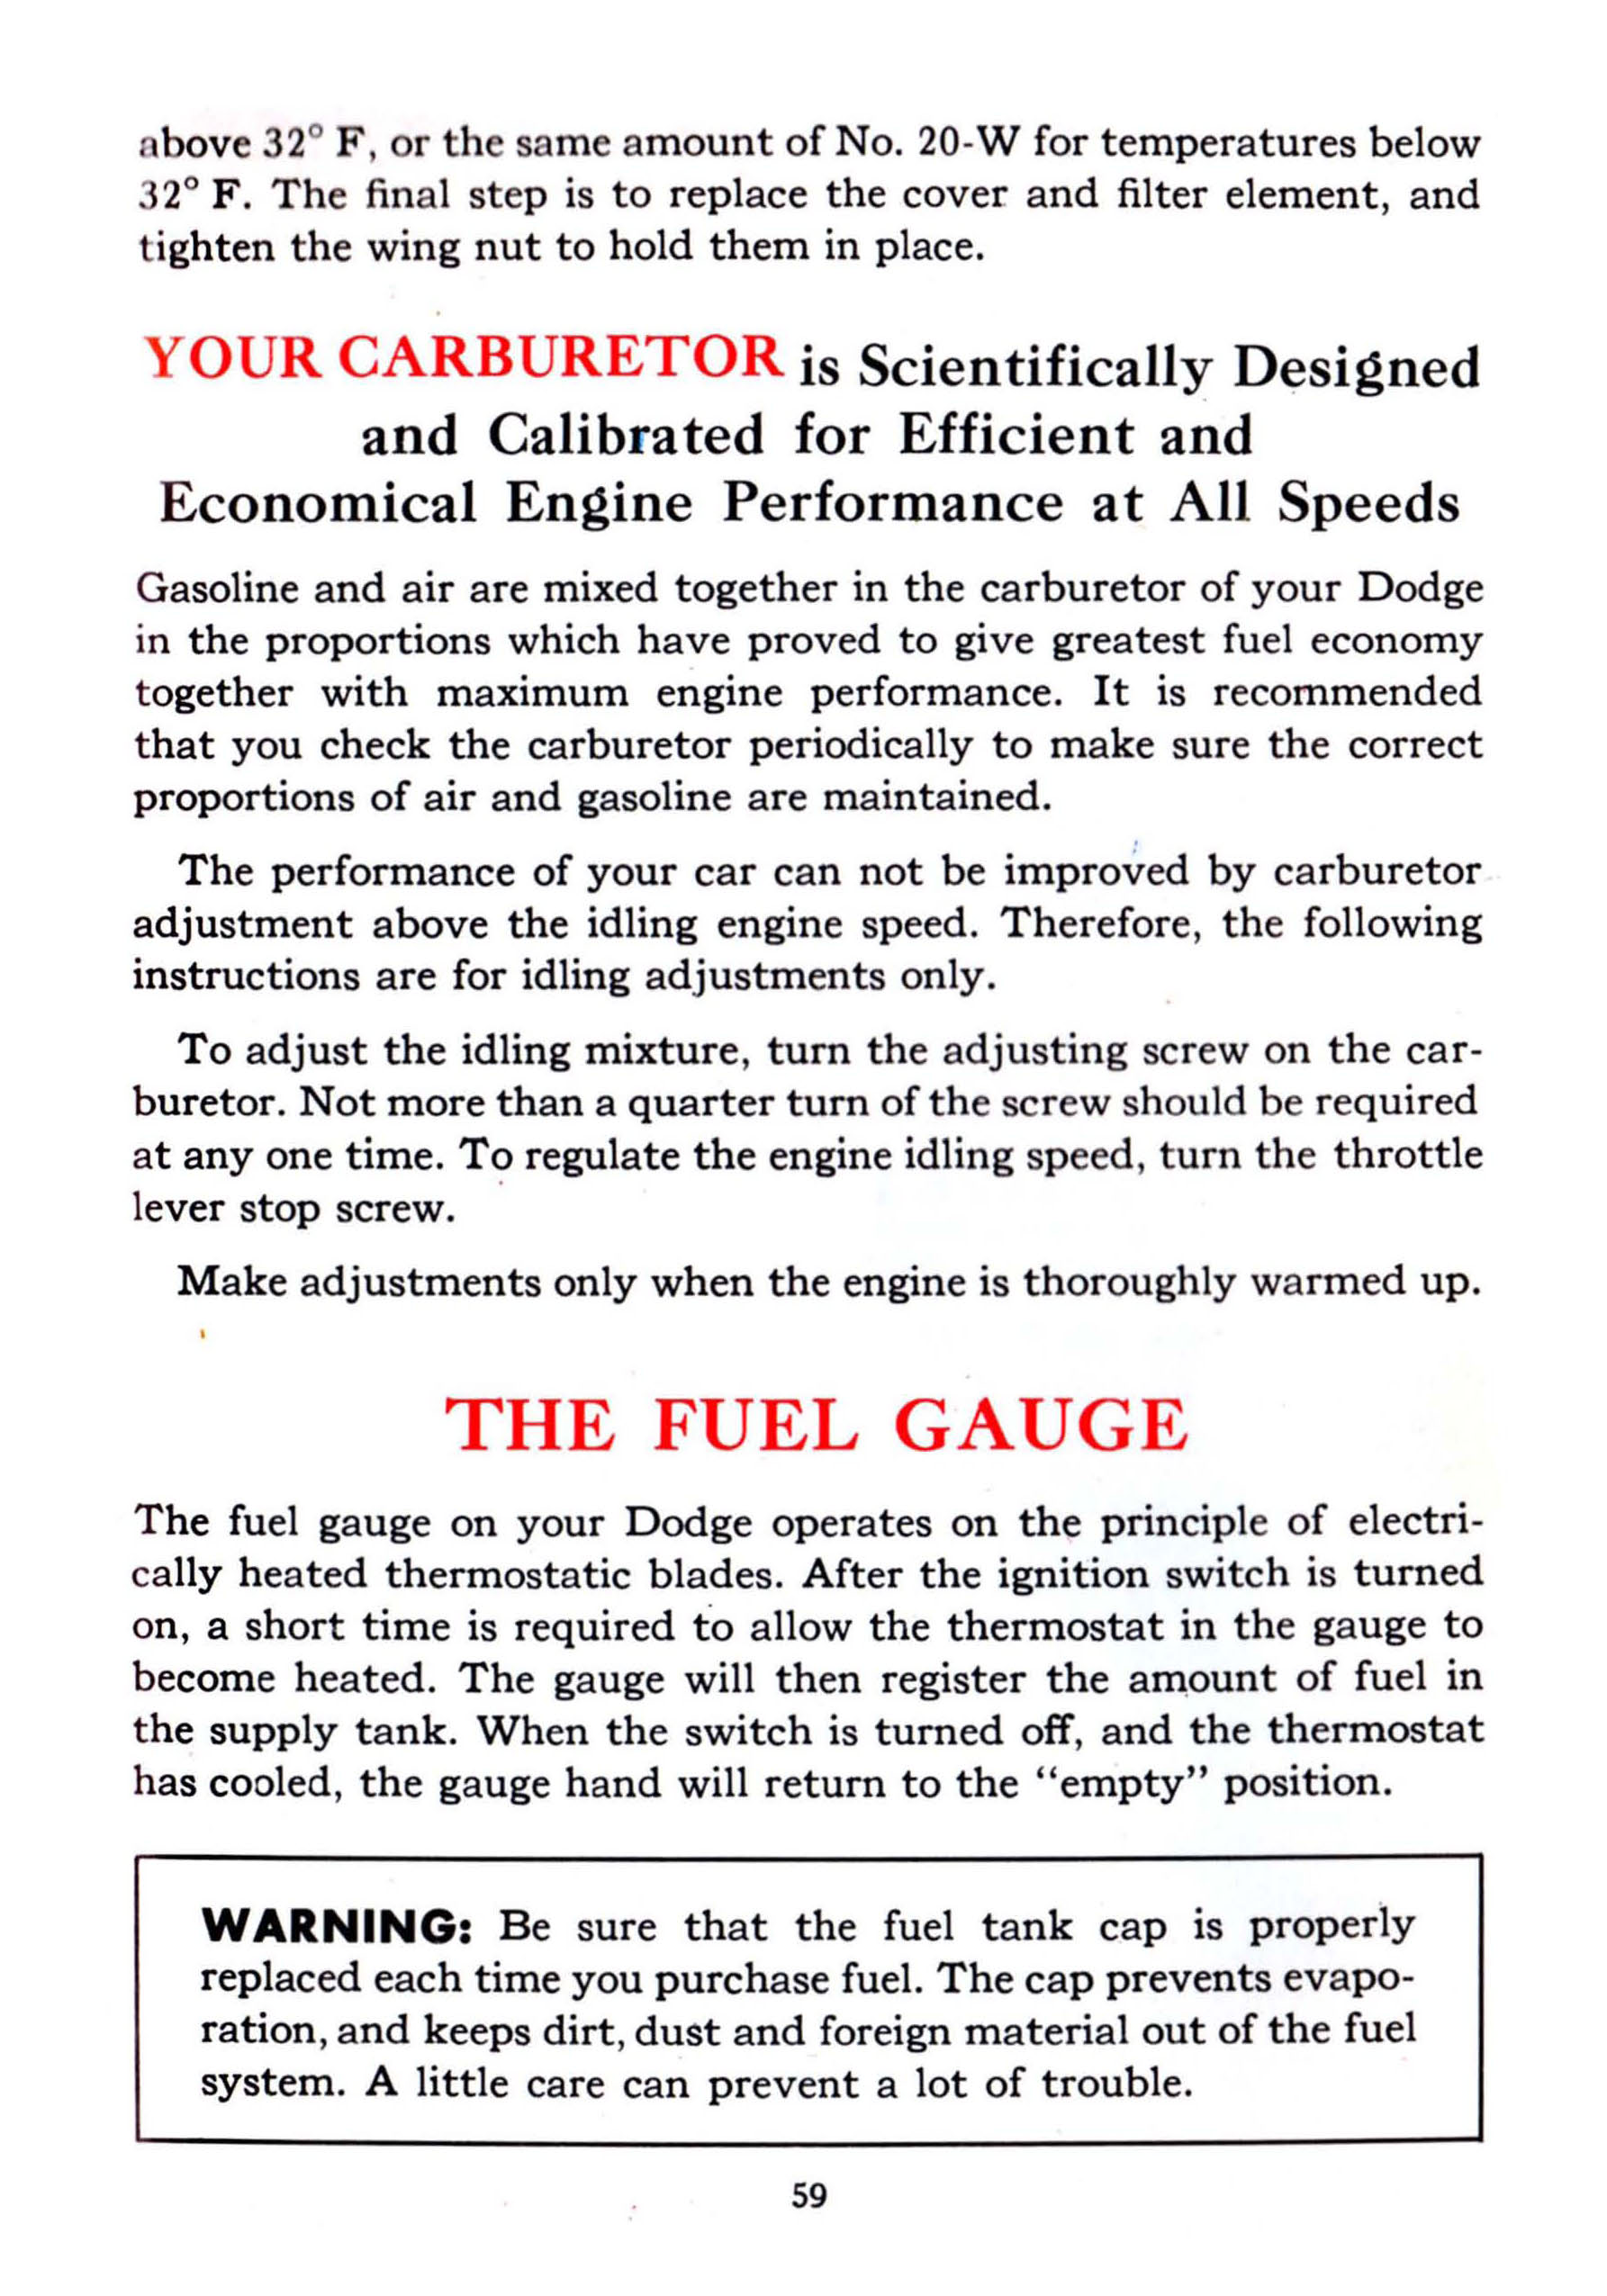 1941_Dodge_Owners_Manual-59